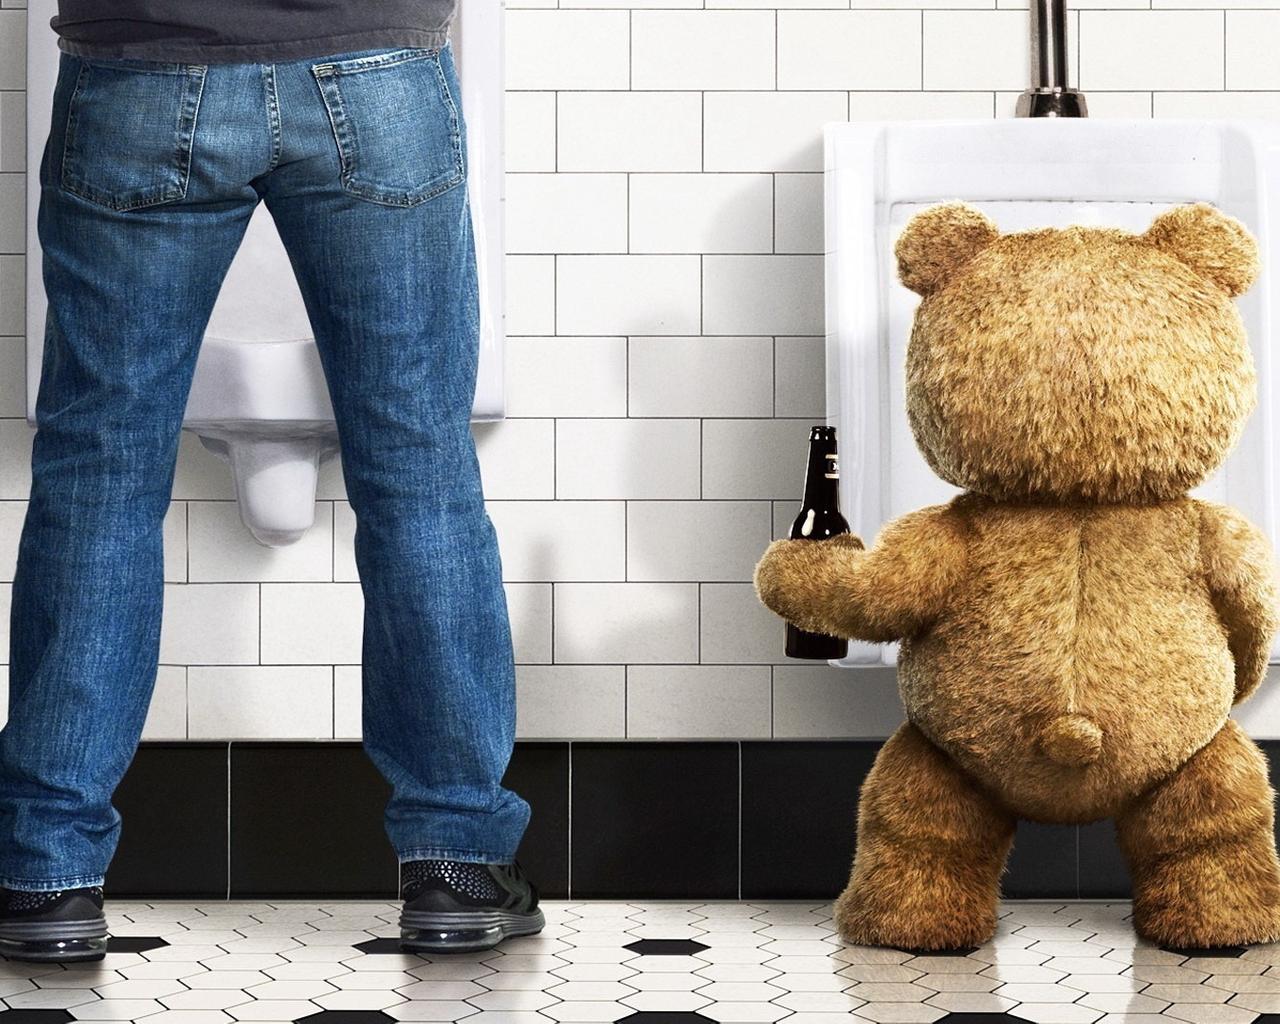 Ted bear and his friend in the Ted movie